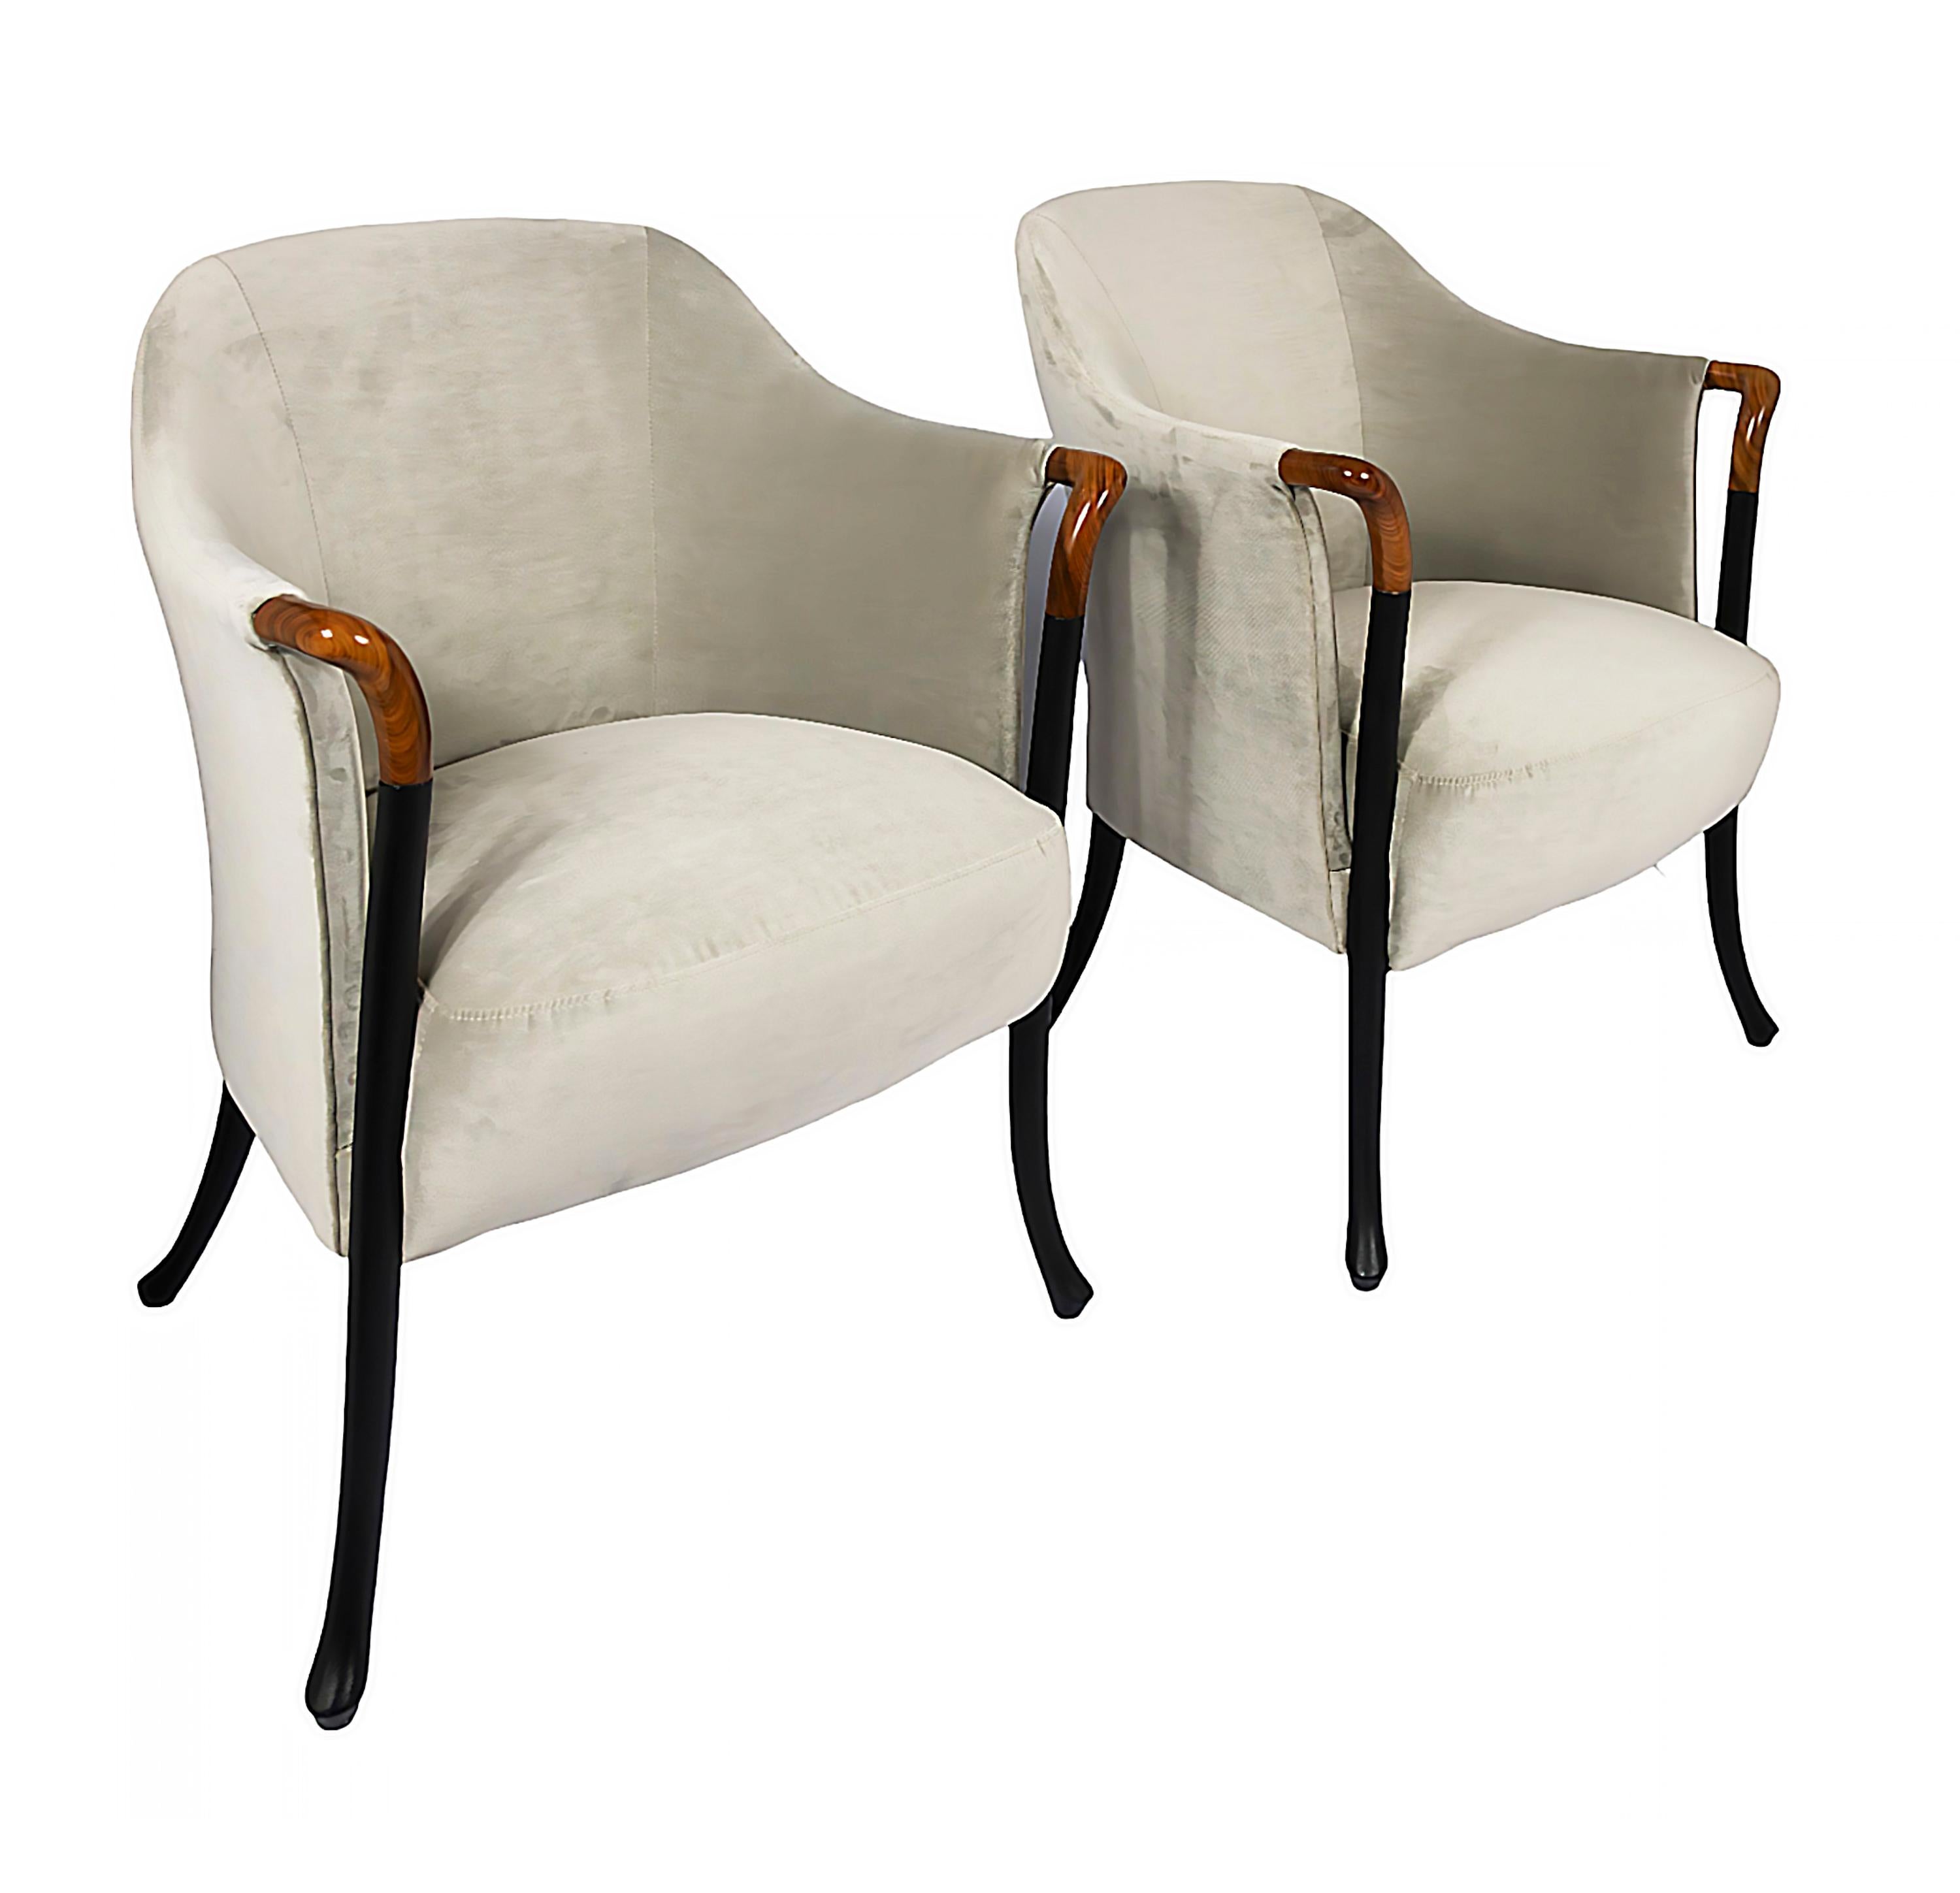 Pair of vintage Progetti armchairs, designed by Umberto Asnago.
Manufacture date circa 1980's by Giorgetti, Italy.
Labeled textile on the bottom.
In ivory velour textile upholstery and wooden frame.
Very good/excellent vintage condition.

 


